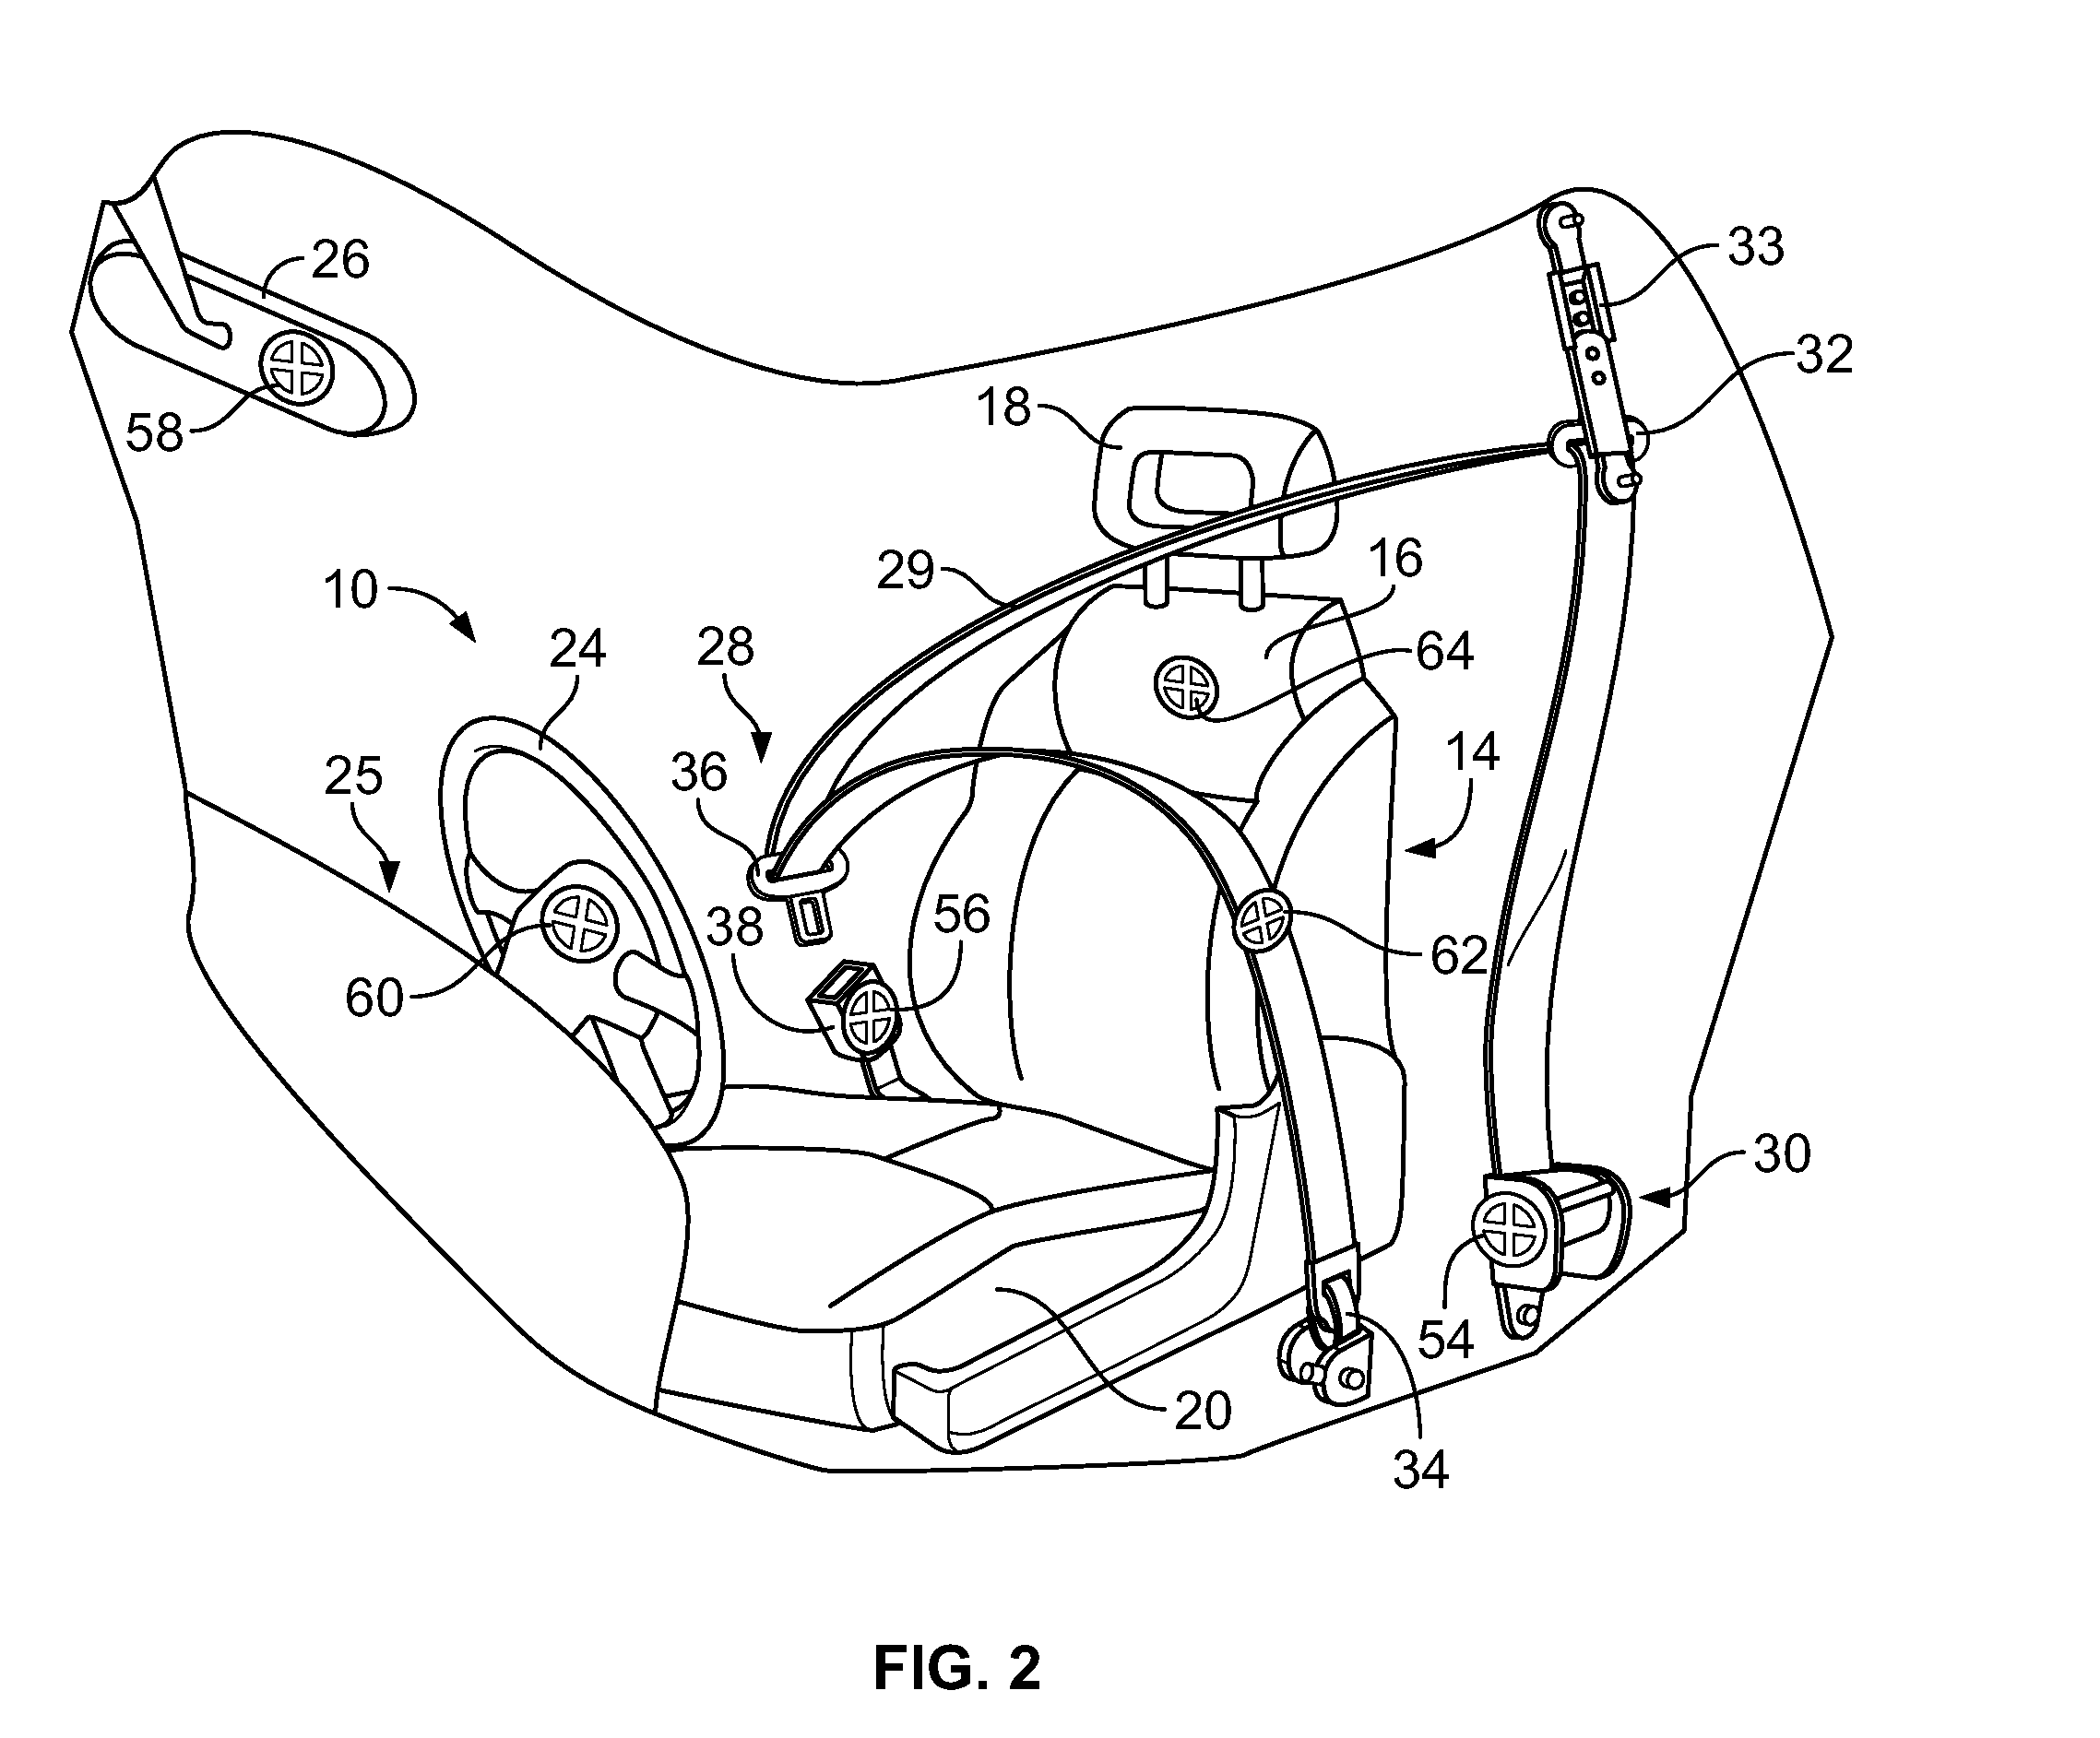 System and method for seatbelt use monitoring